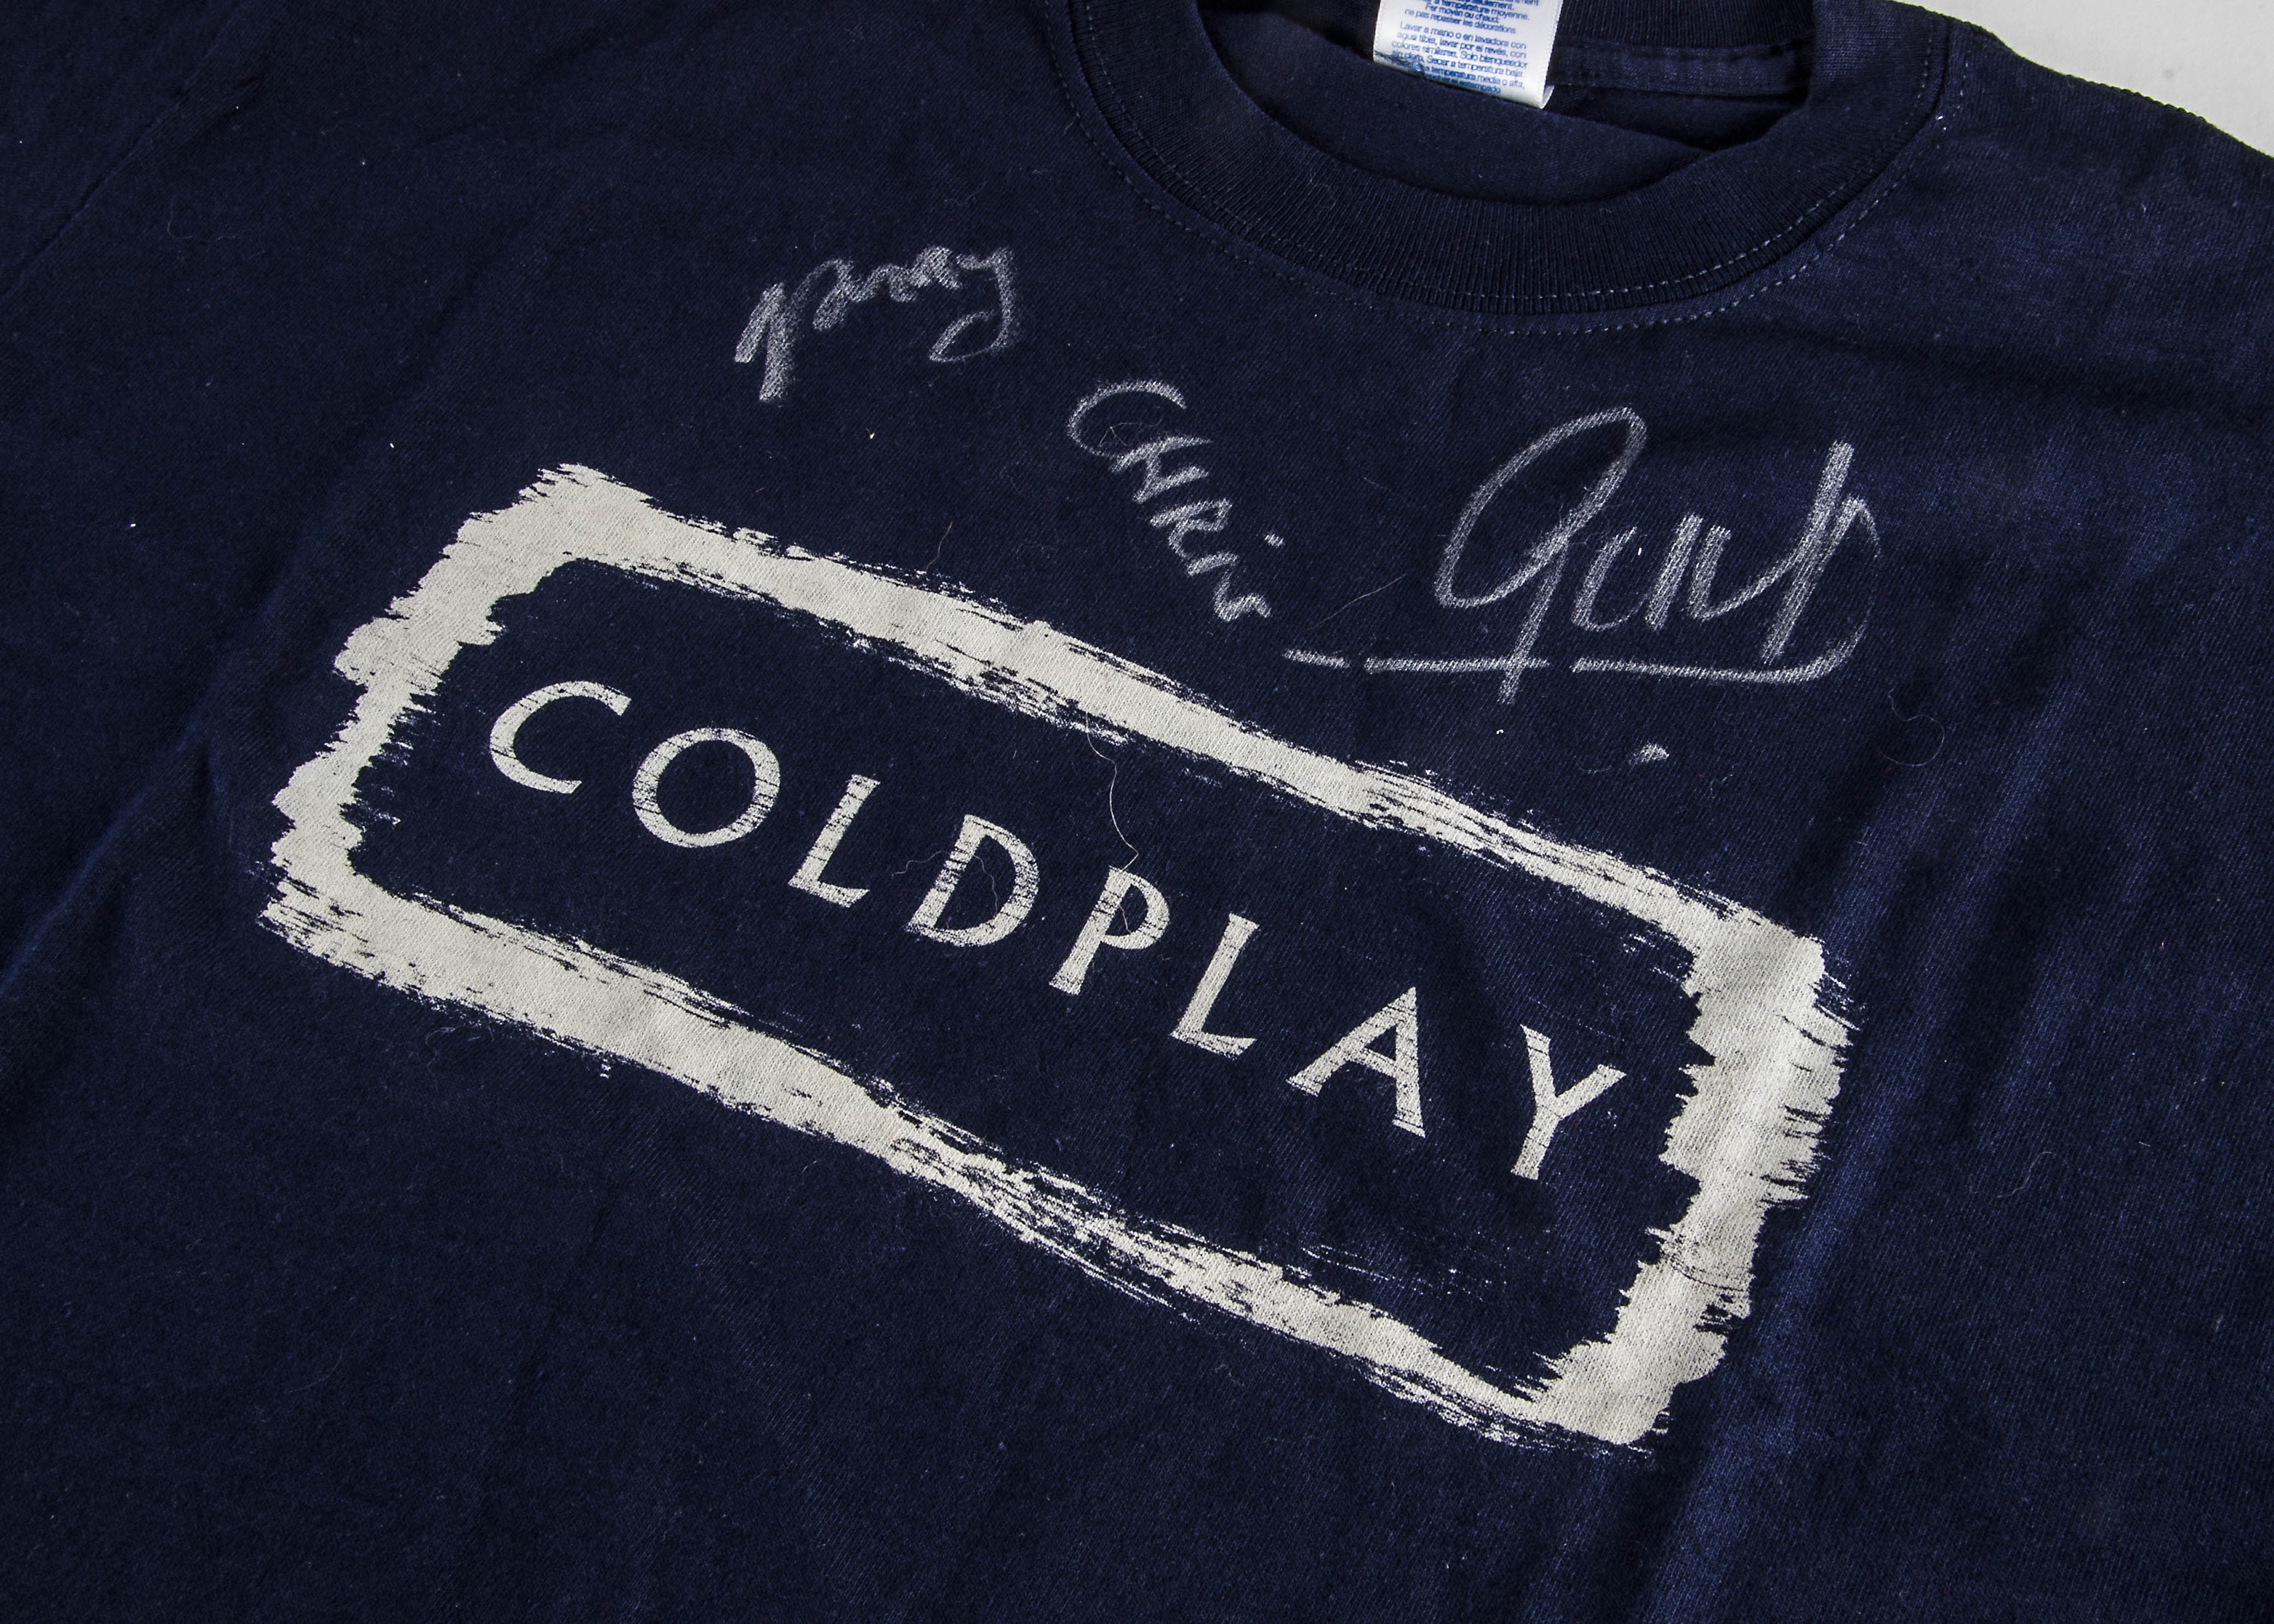 Coldplay / Signed T Shirt, signed Coldplay T Shirt - Coldplay Tour 2003 (Blue - Medium); given to